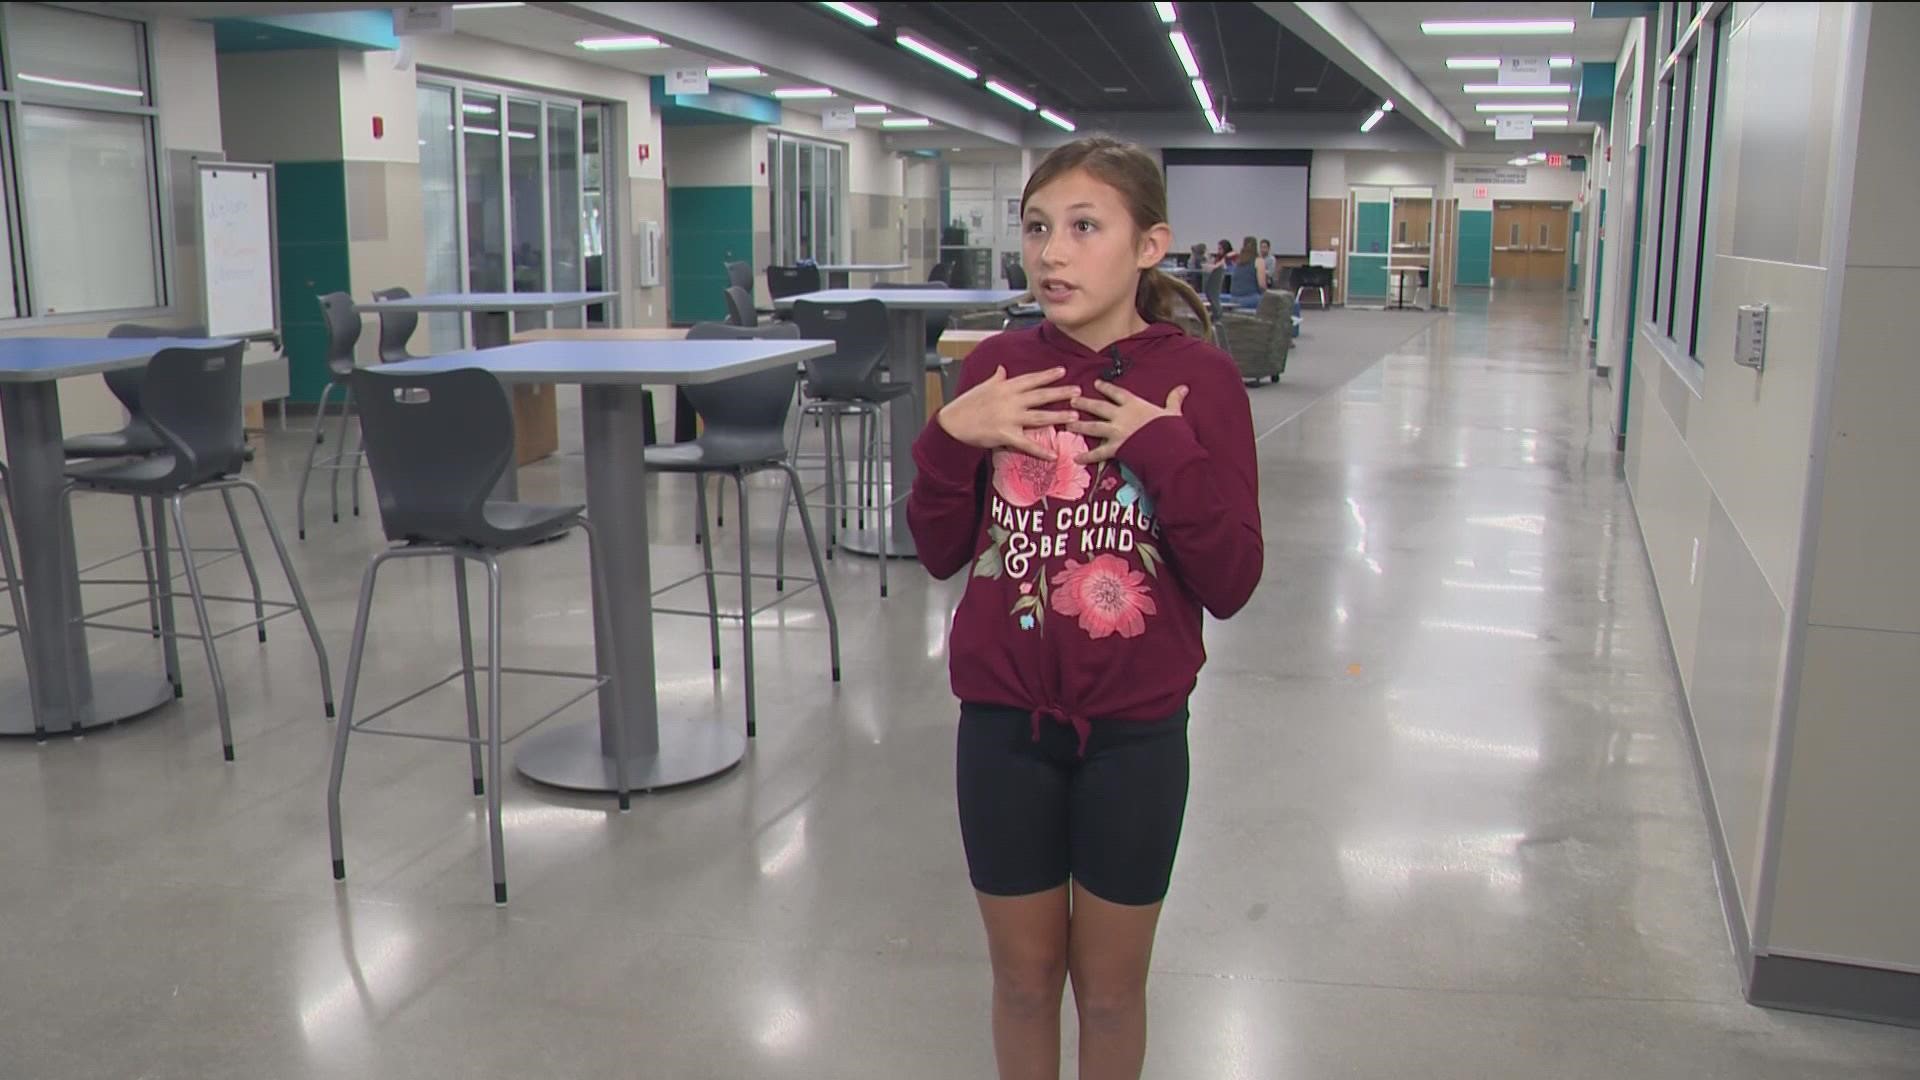 Students in Texas and all over the country wore maroon to show support for Uvalde. KVUE spoke with students and teachers at Leander ISD about how they were feeling.